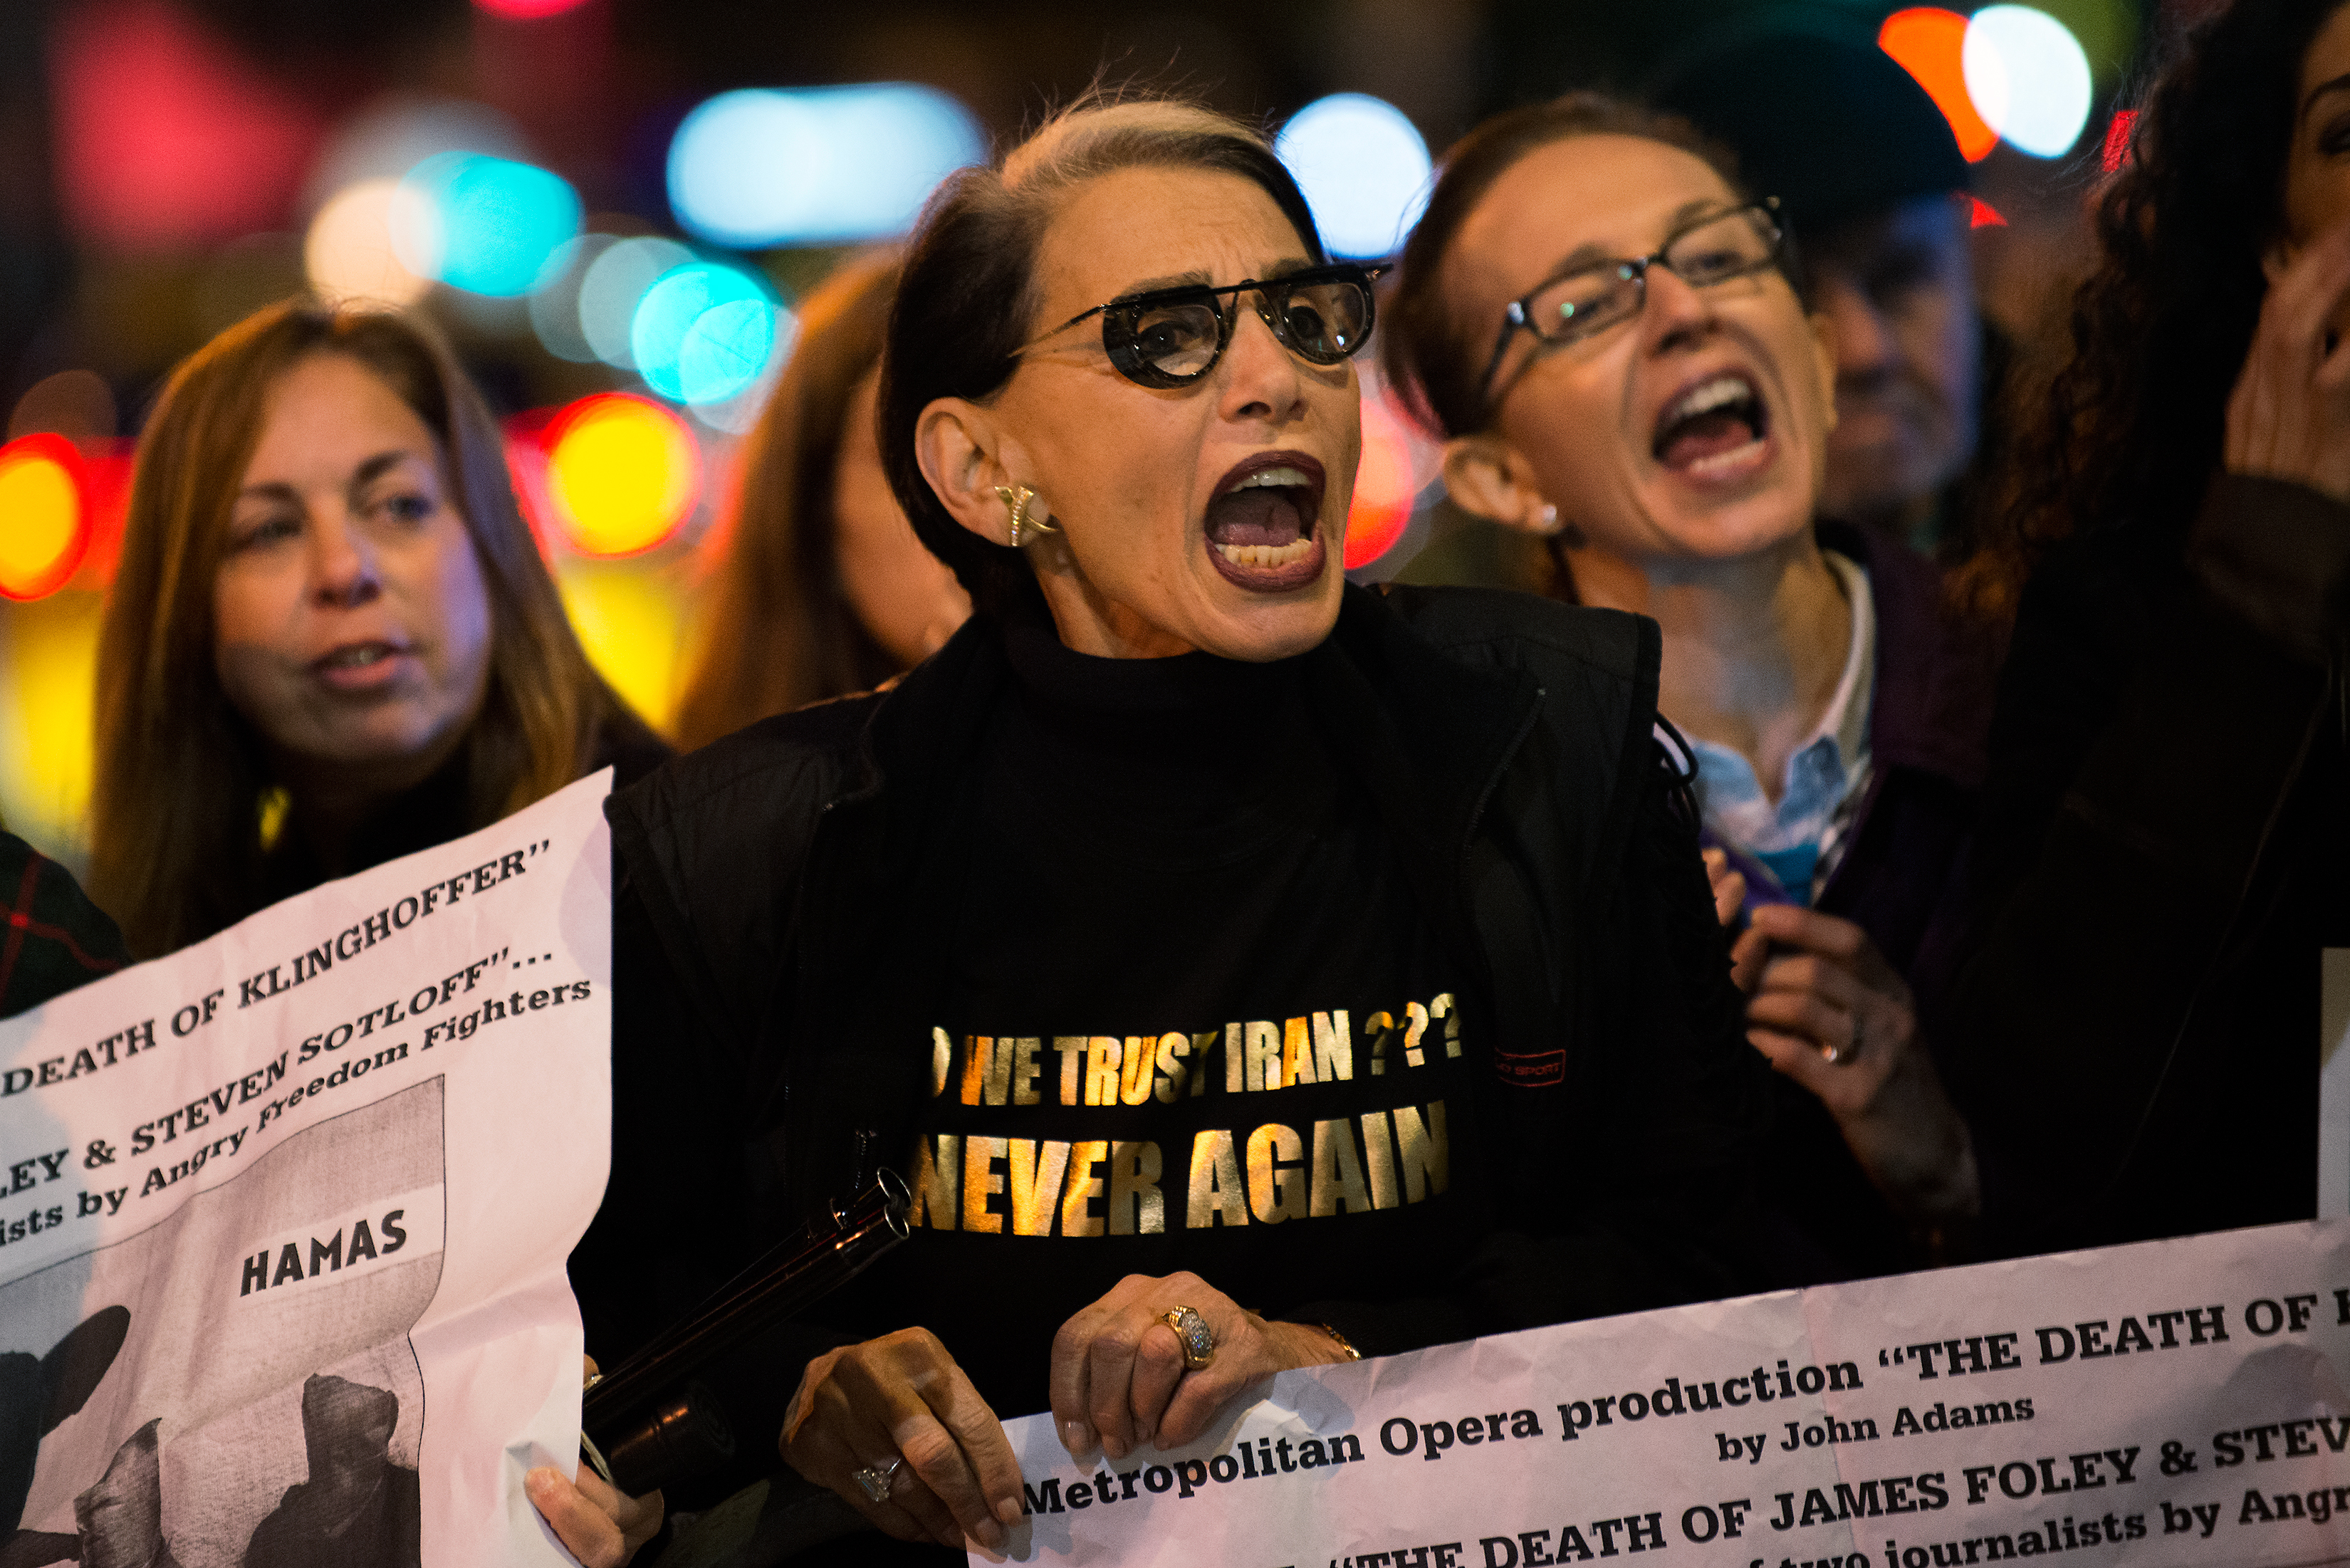 Protestors yell at counter-protestors and opera attendees at the Metropolitan Opera at Lincoln Center on opening night of the opera, "The Death of Klinghoffer" on October 20, 2014 in New York, NY. (Bryan Thomas&mdash;Getty Images)